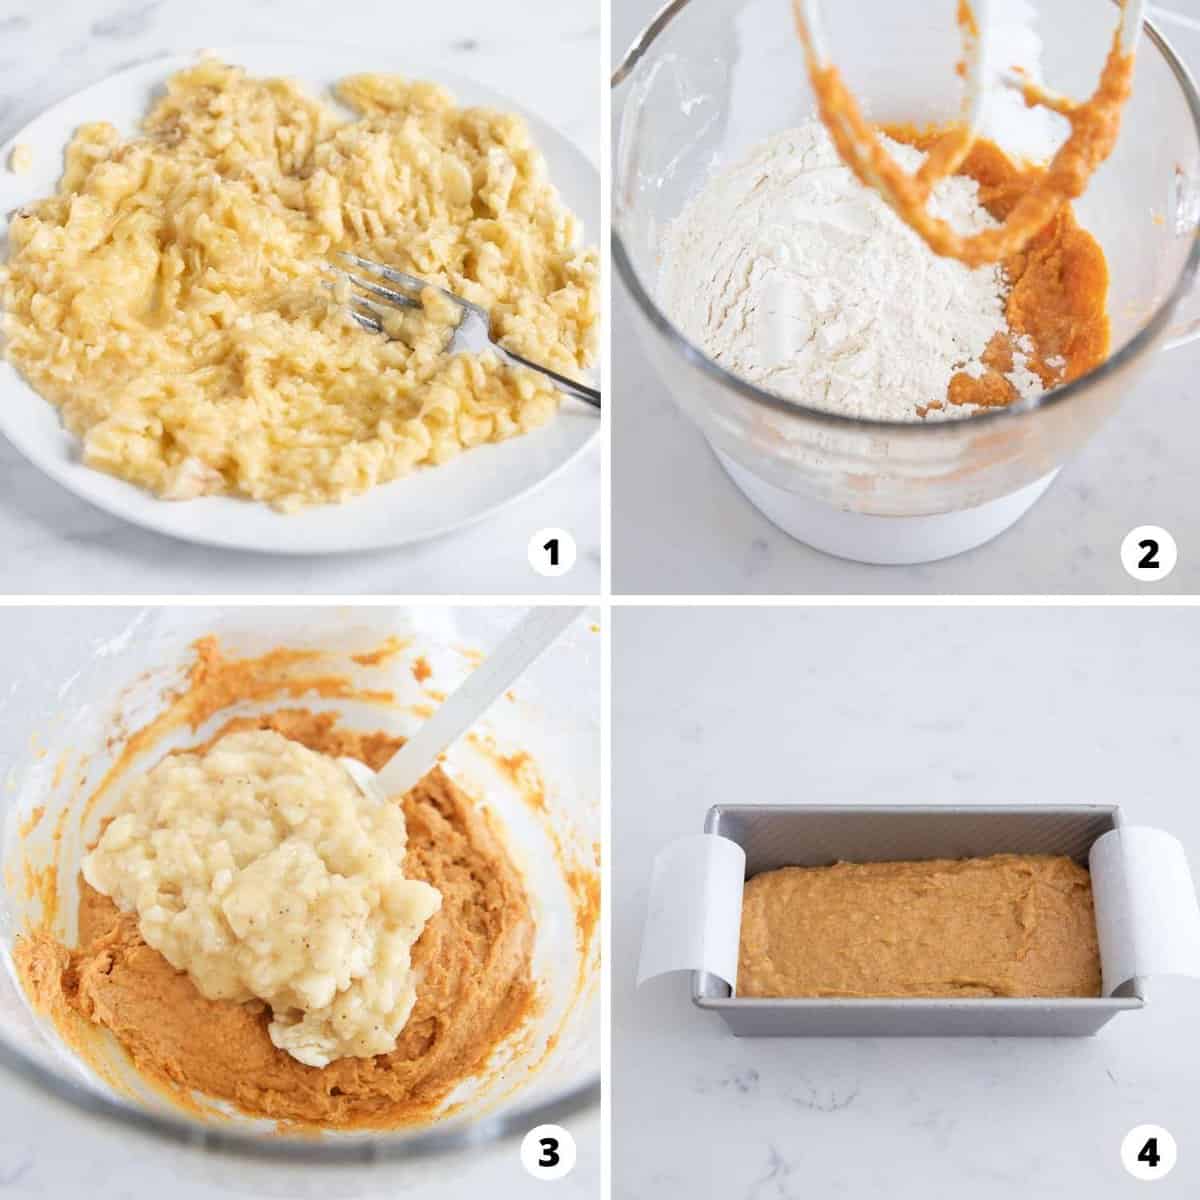 The process of showing how to make pumpkin banana bread.